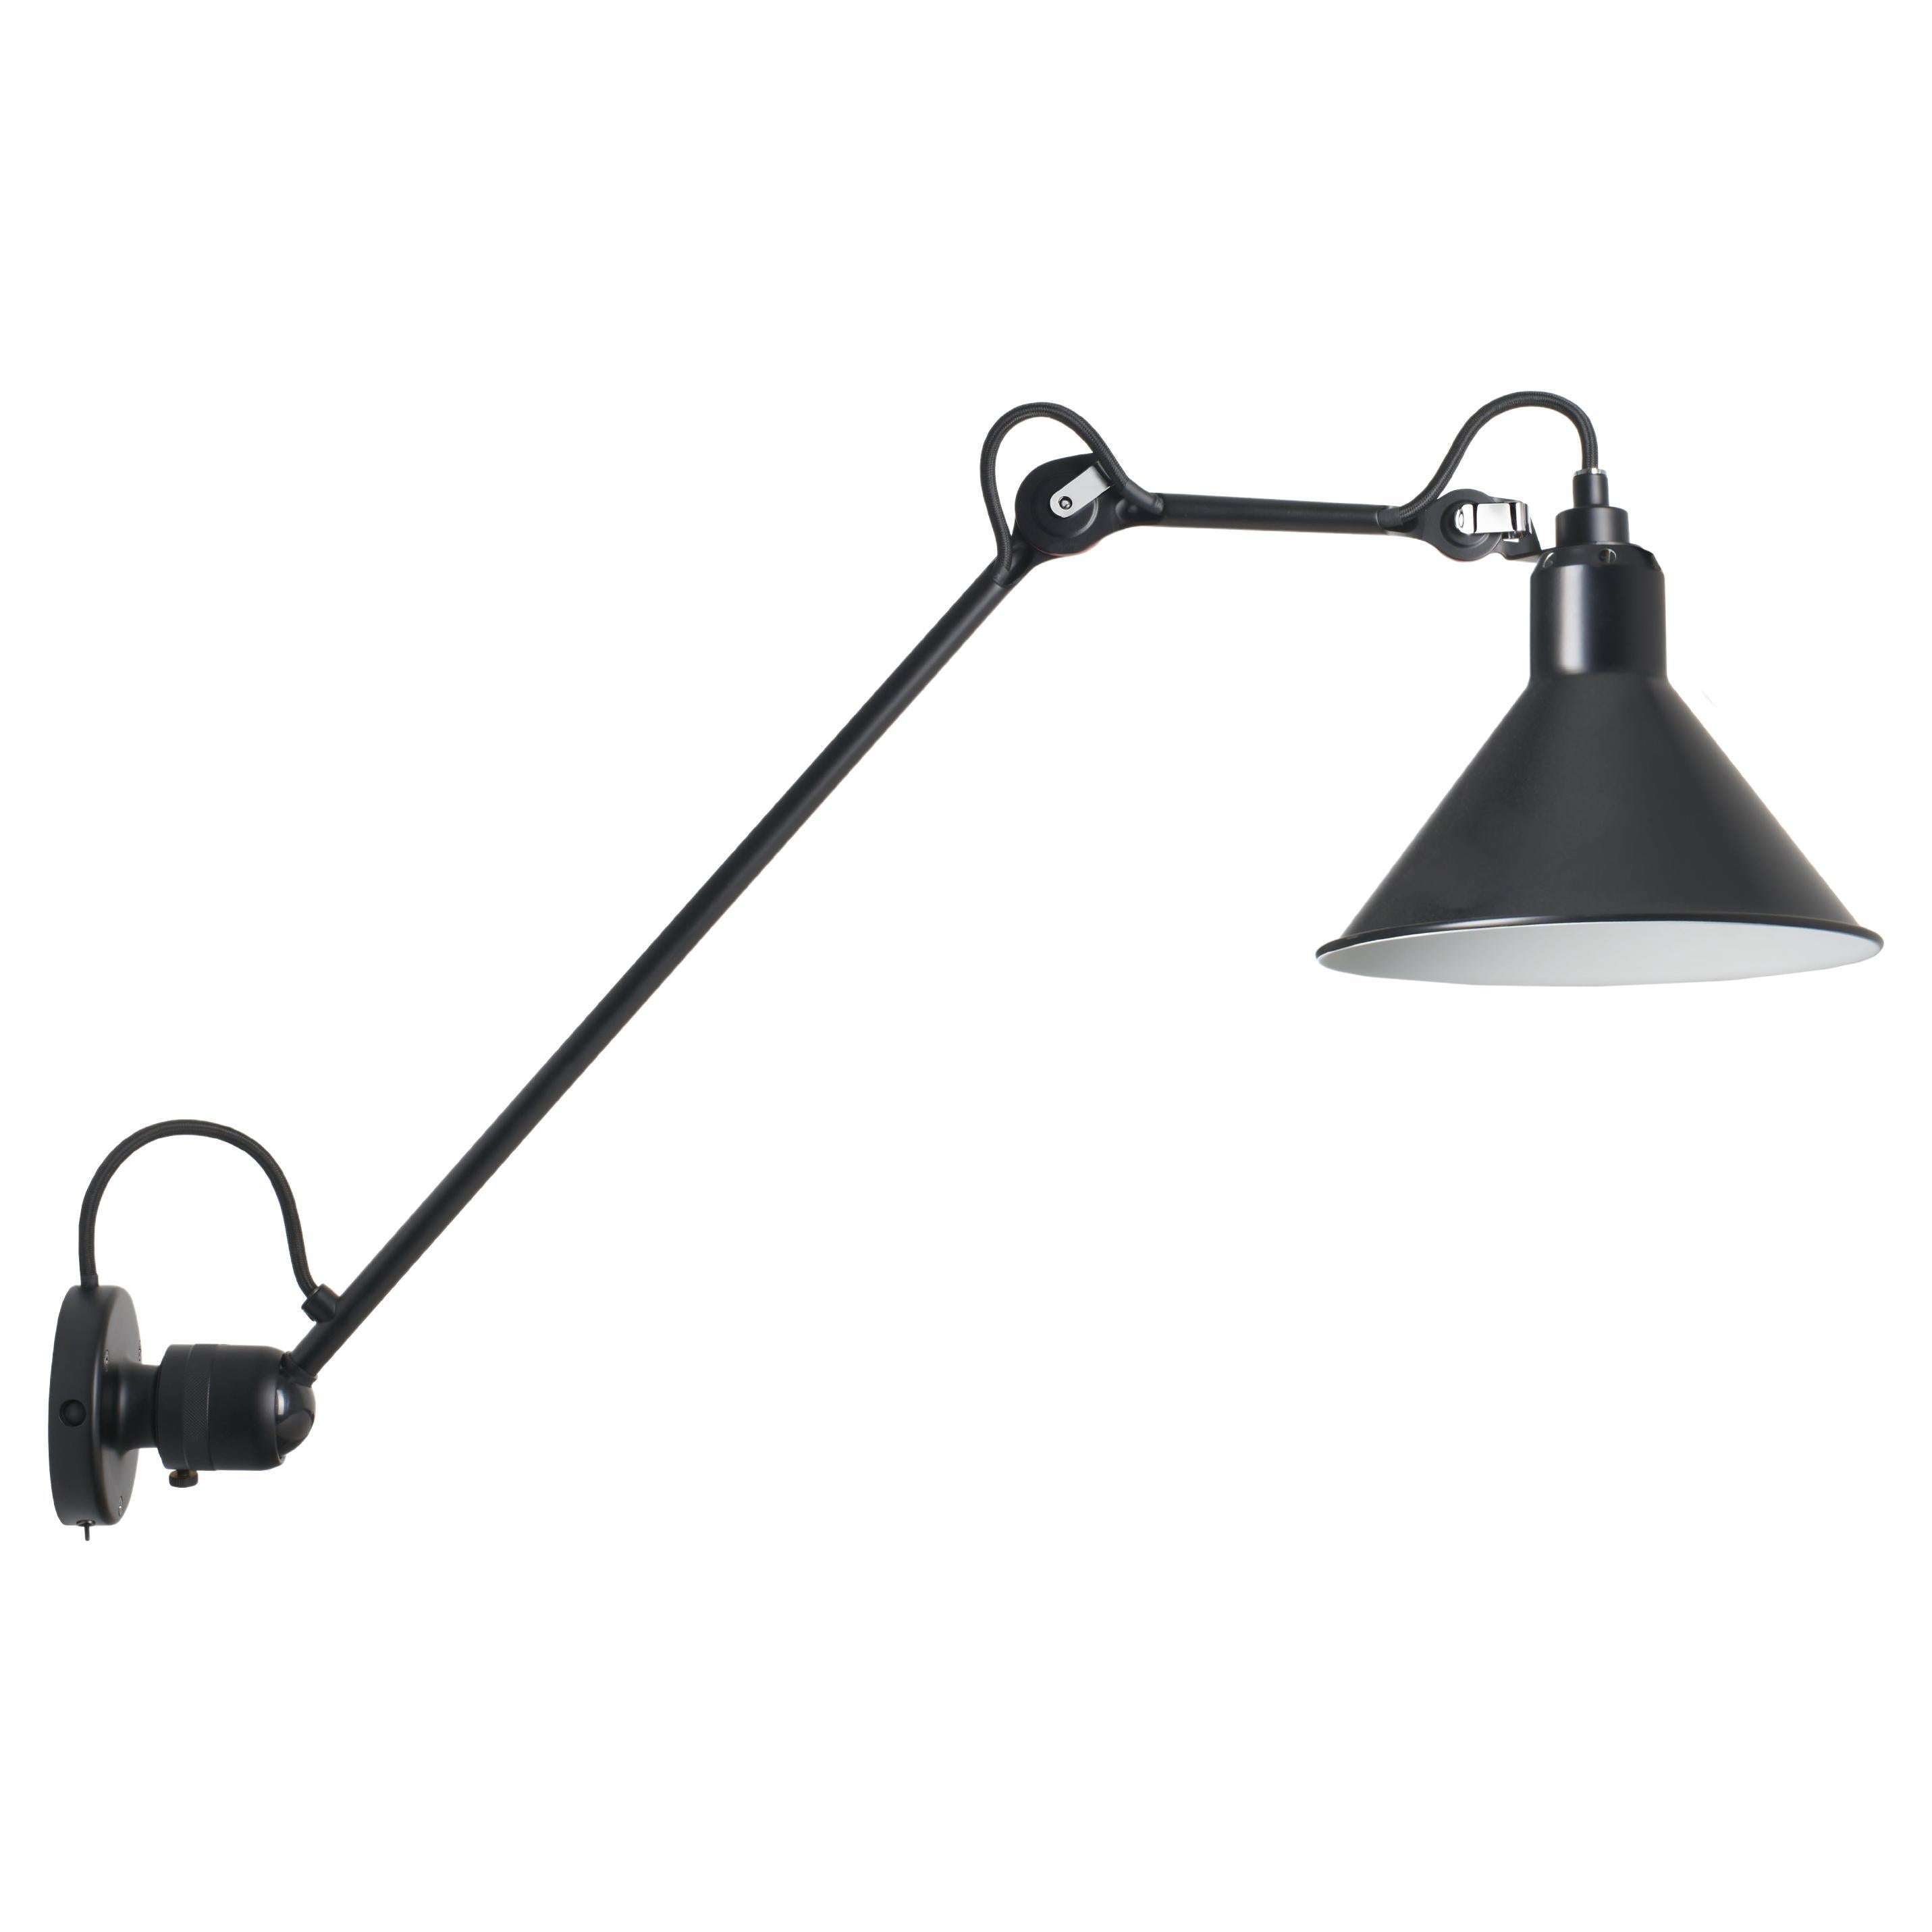 DCW Editions La Lampe Gras N°304 L40 SW Conic Wall Lamp in Black Shade